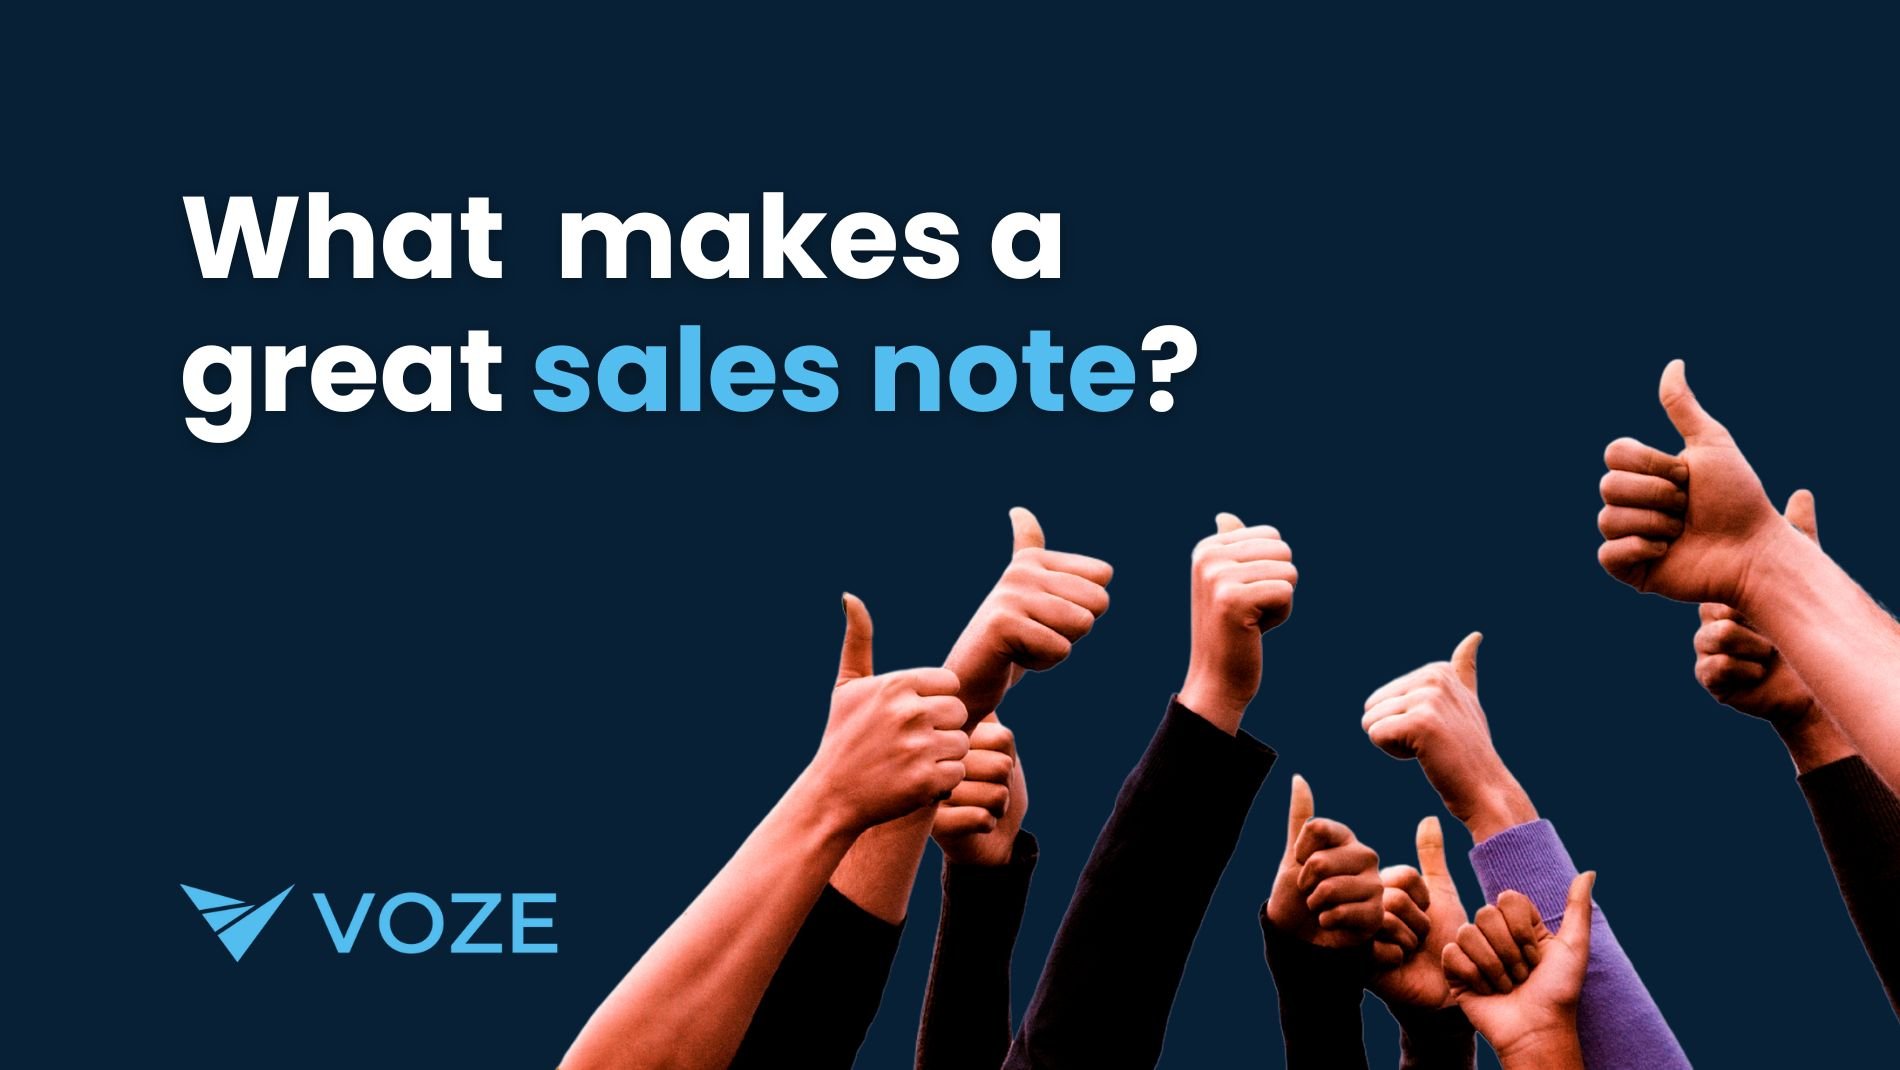 What makes a great sales note